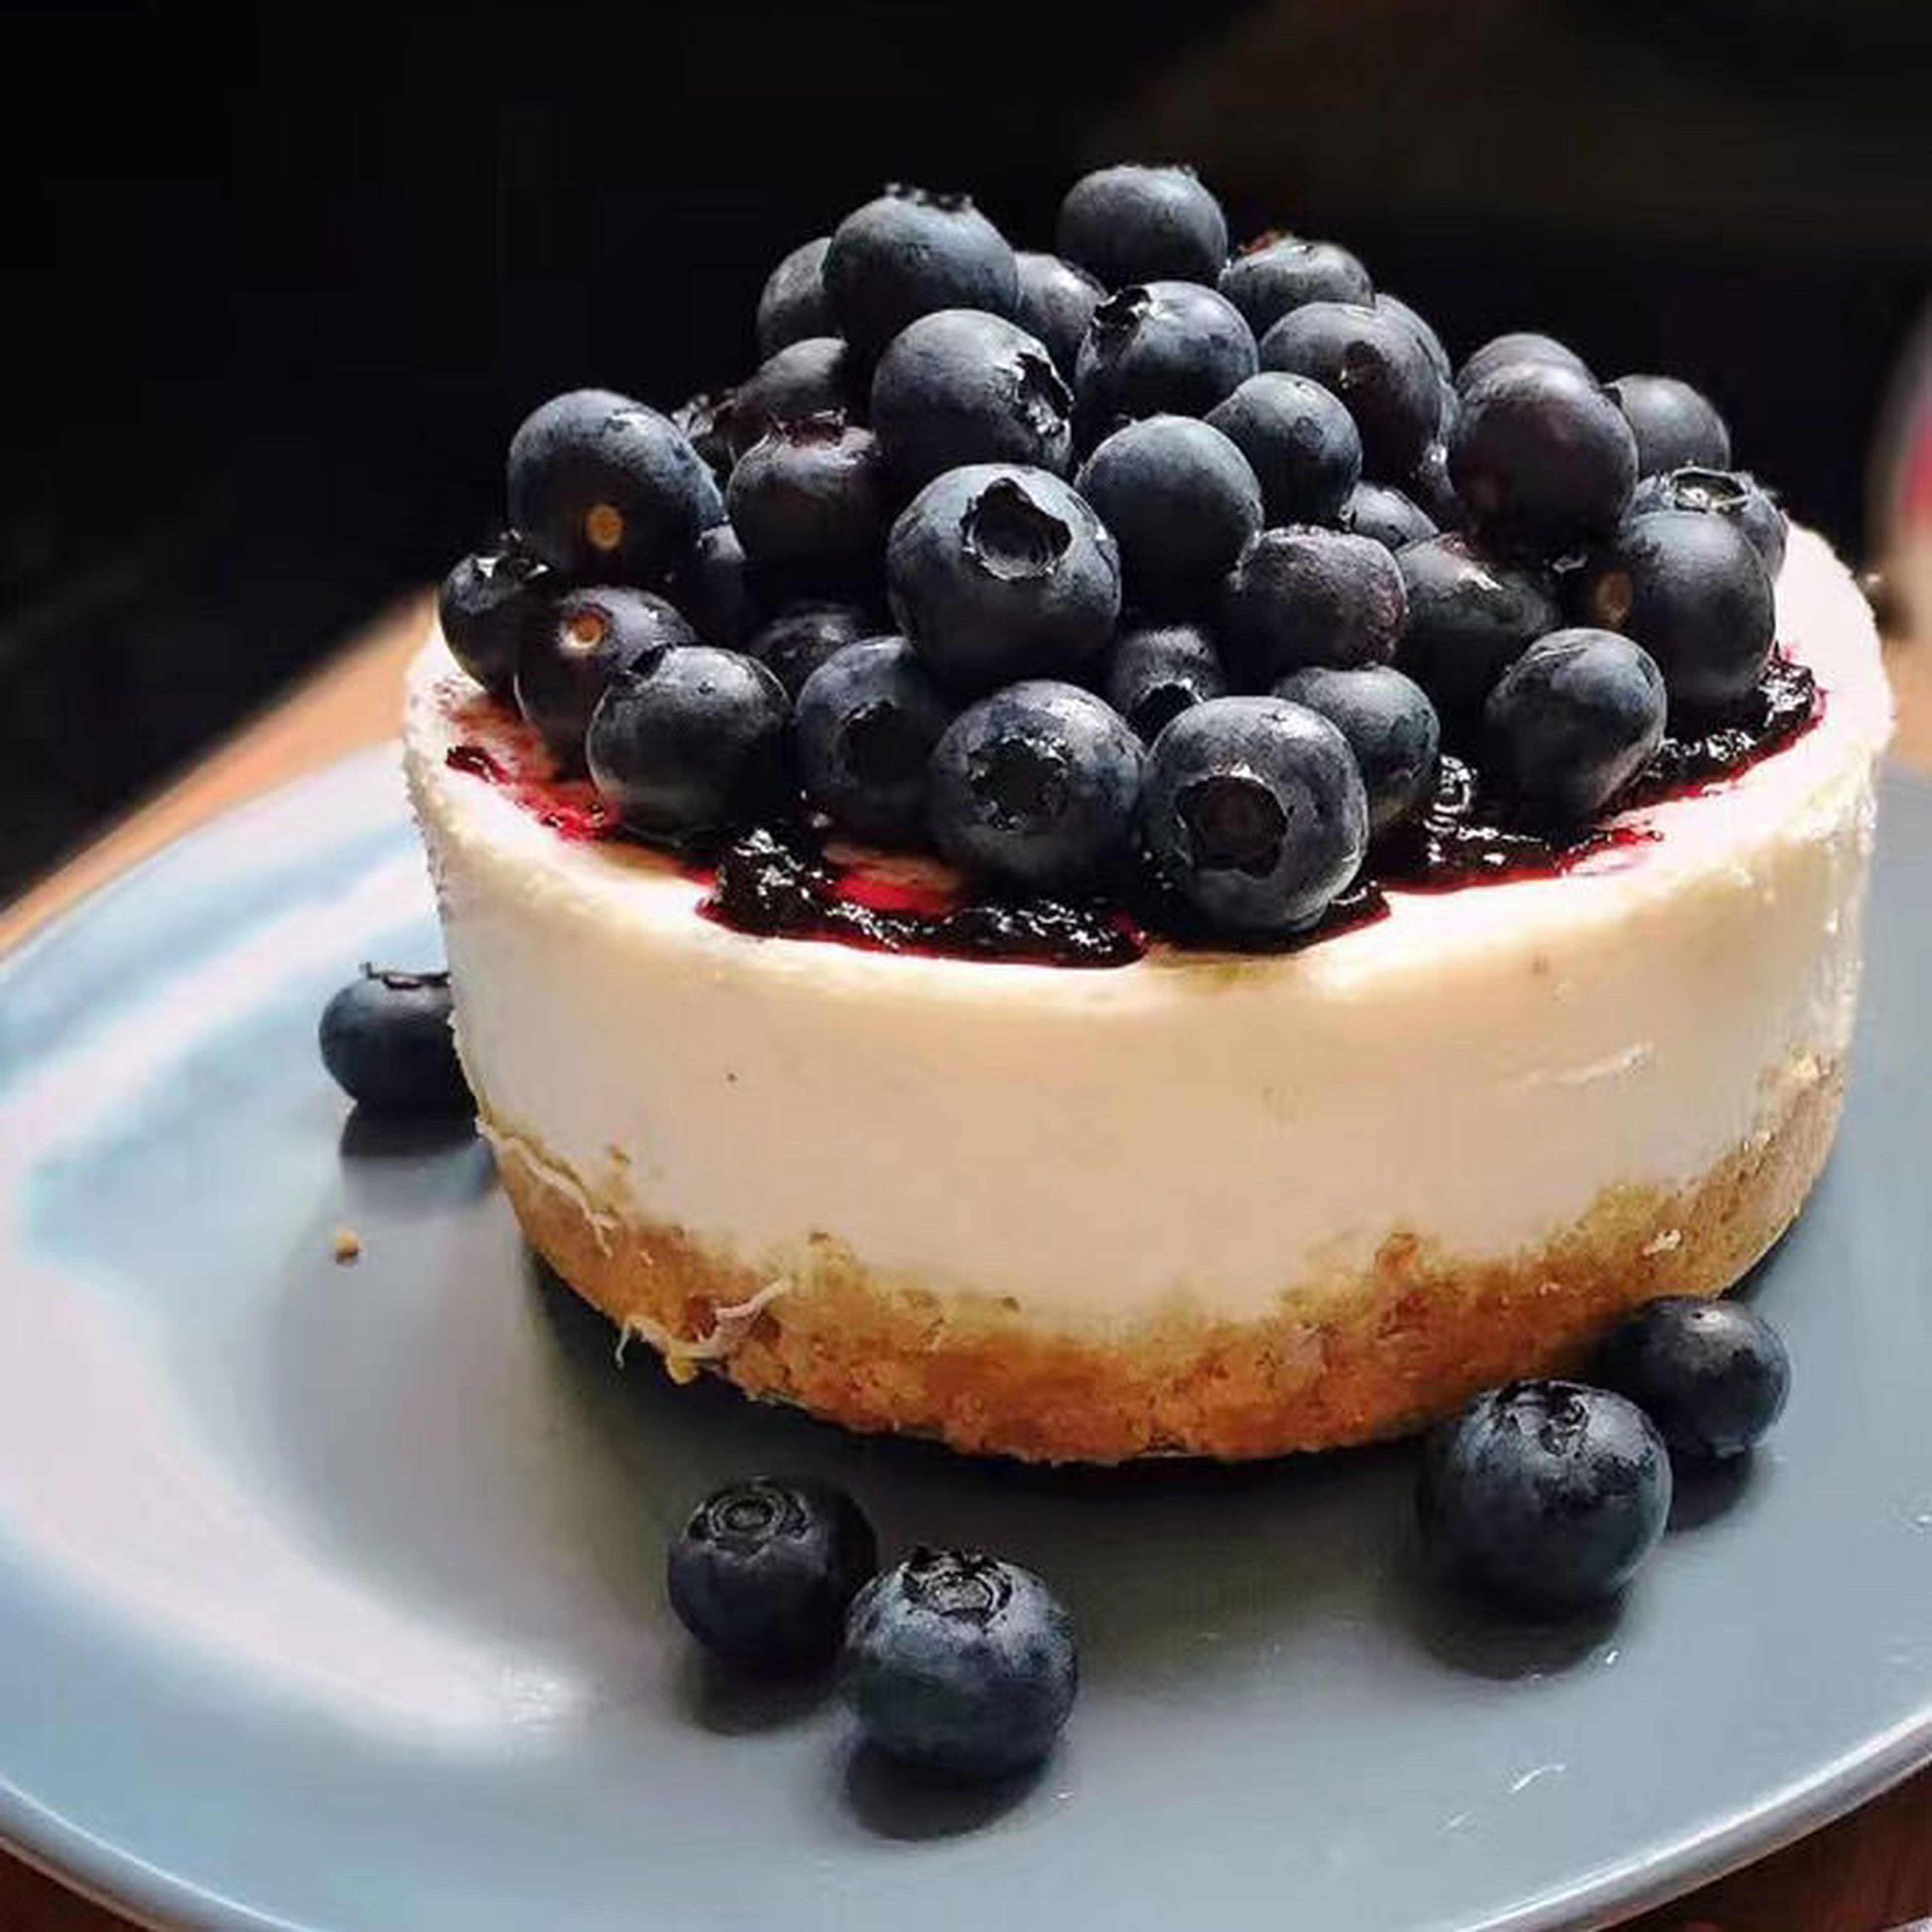 Classic cheesecake with blueberries